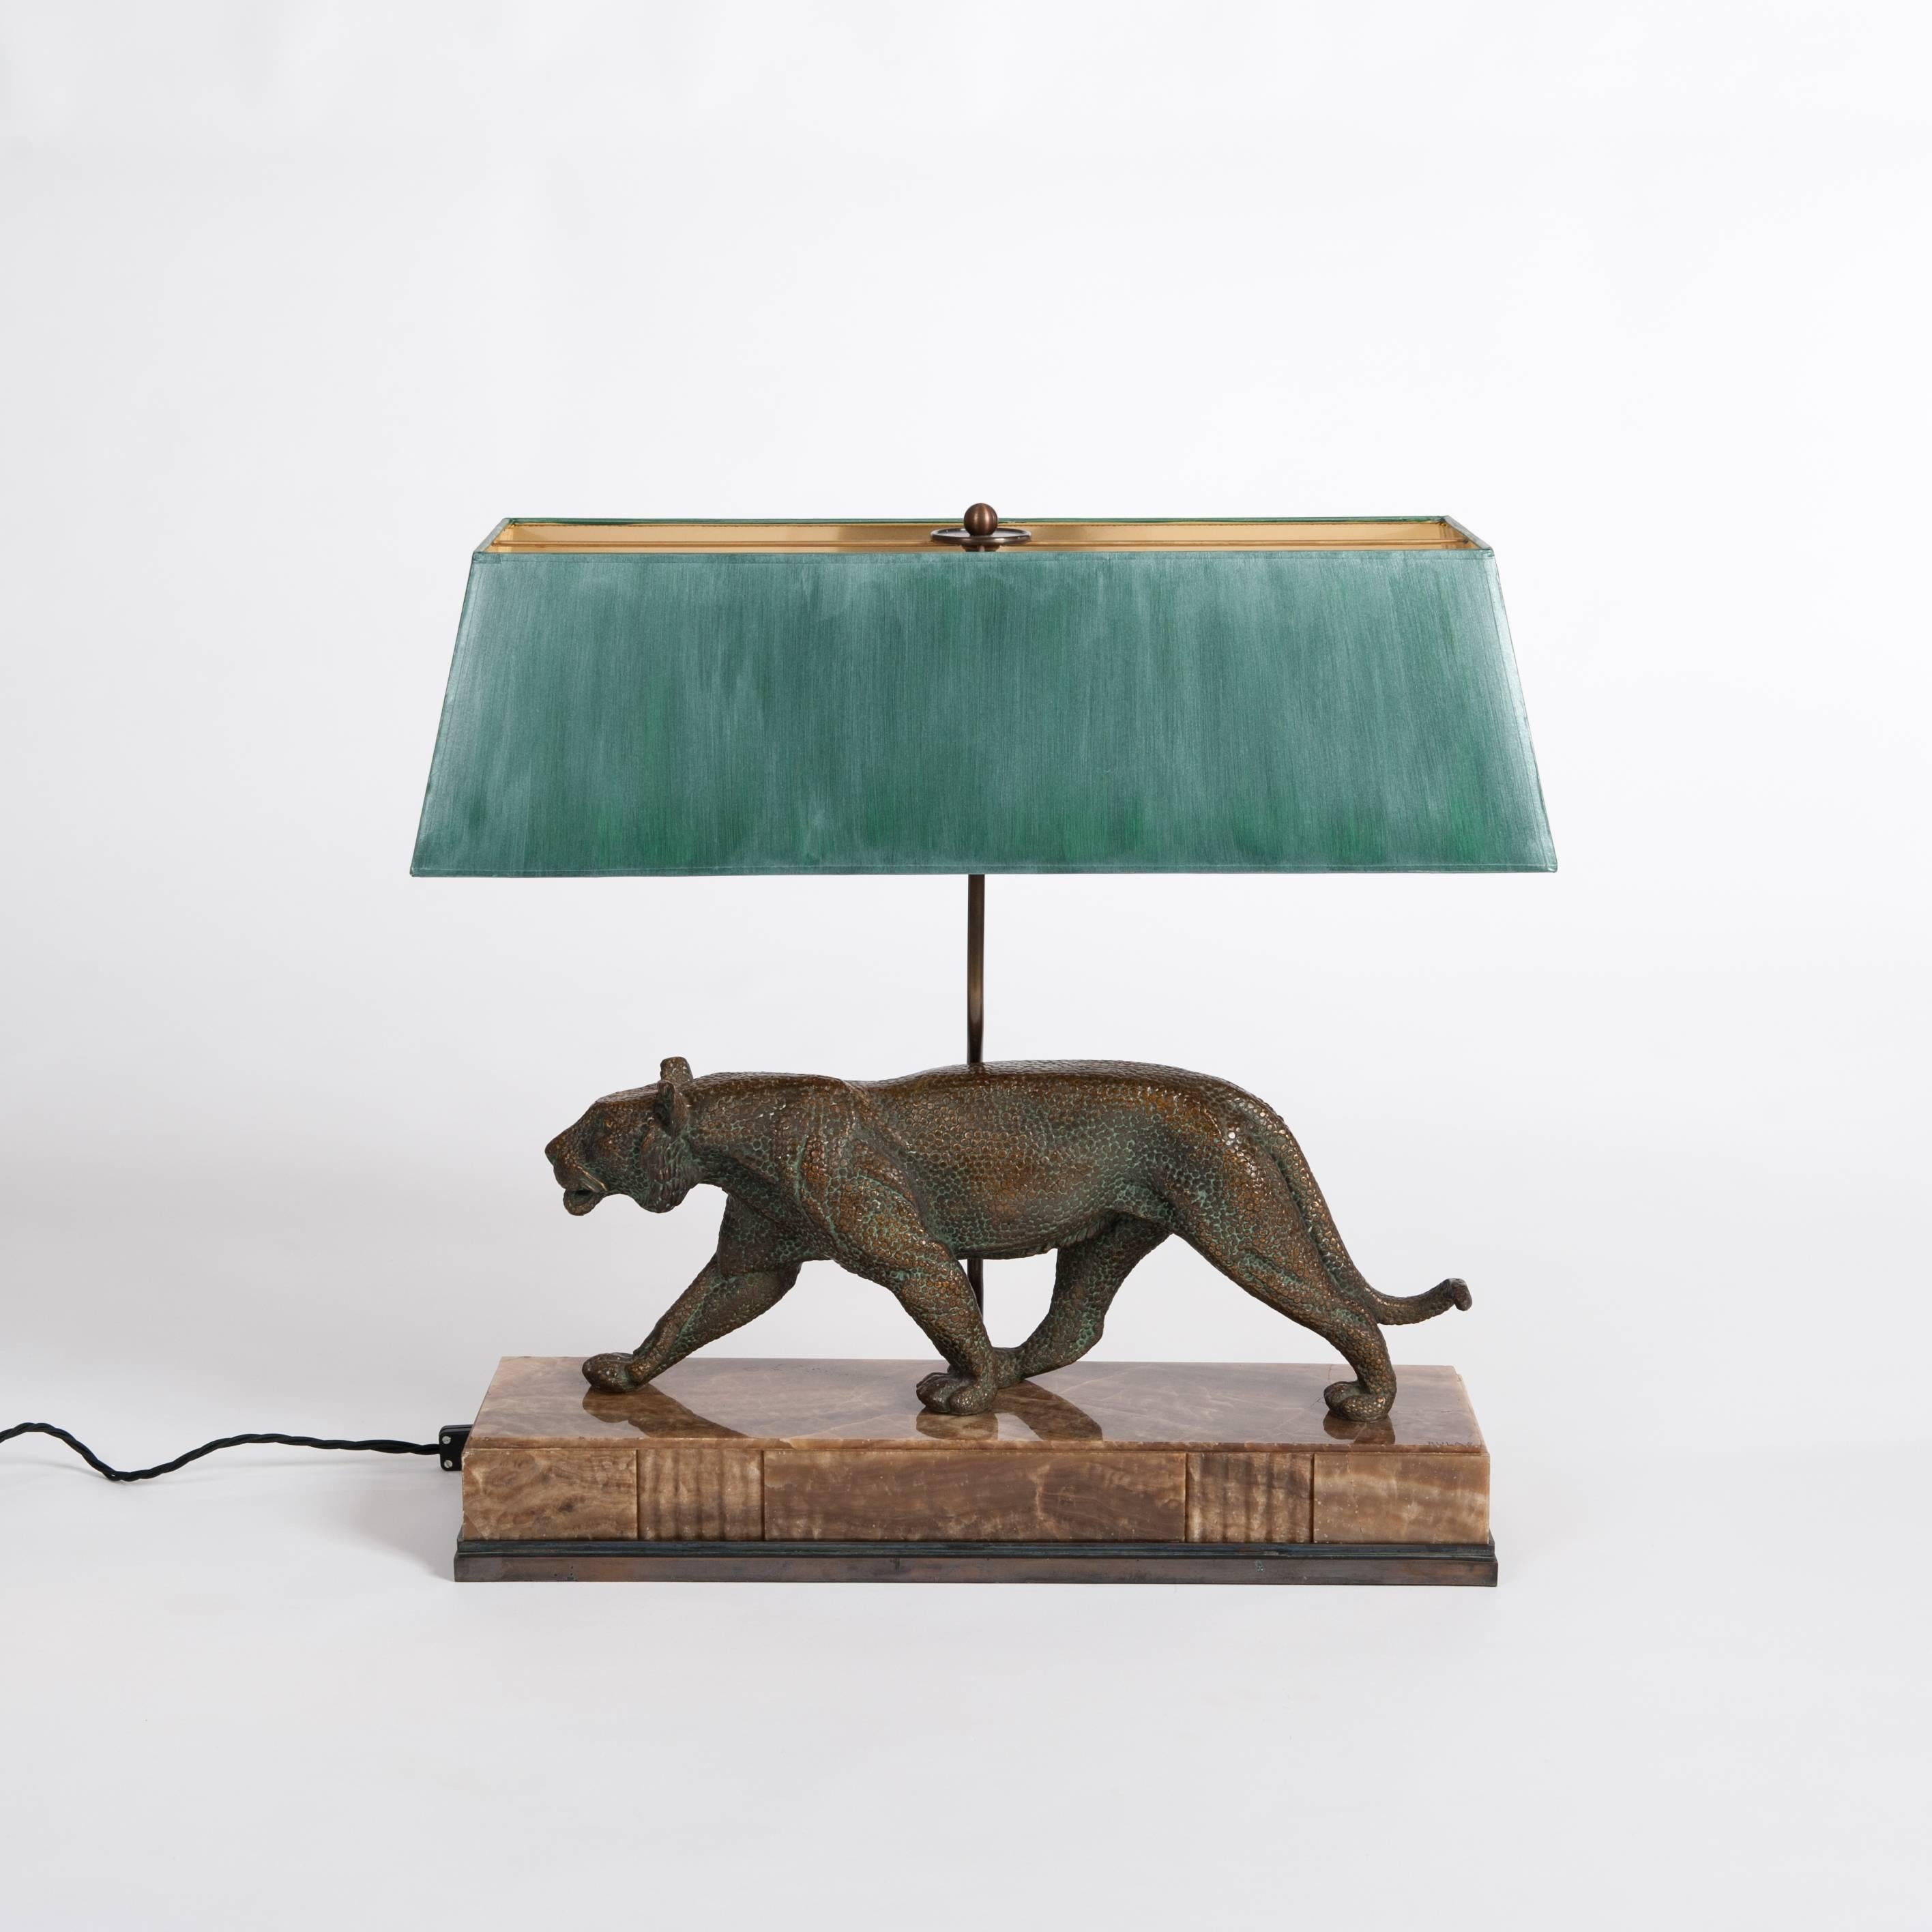 Very fine Art Deco cast bronze from France with a purpose built lamp construction and socle.
Sujet: Hammered and patinated bronze Art Deco panther on onyx base,
handsigned 